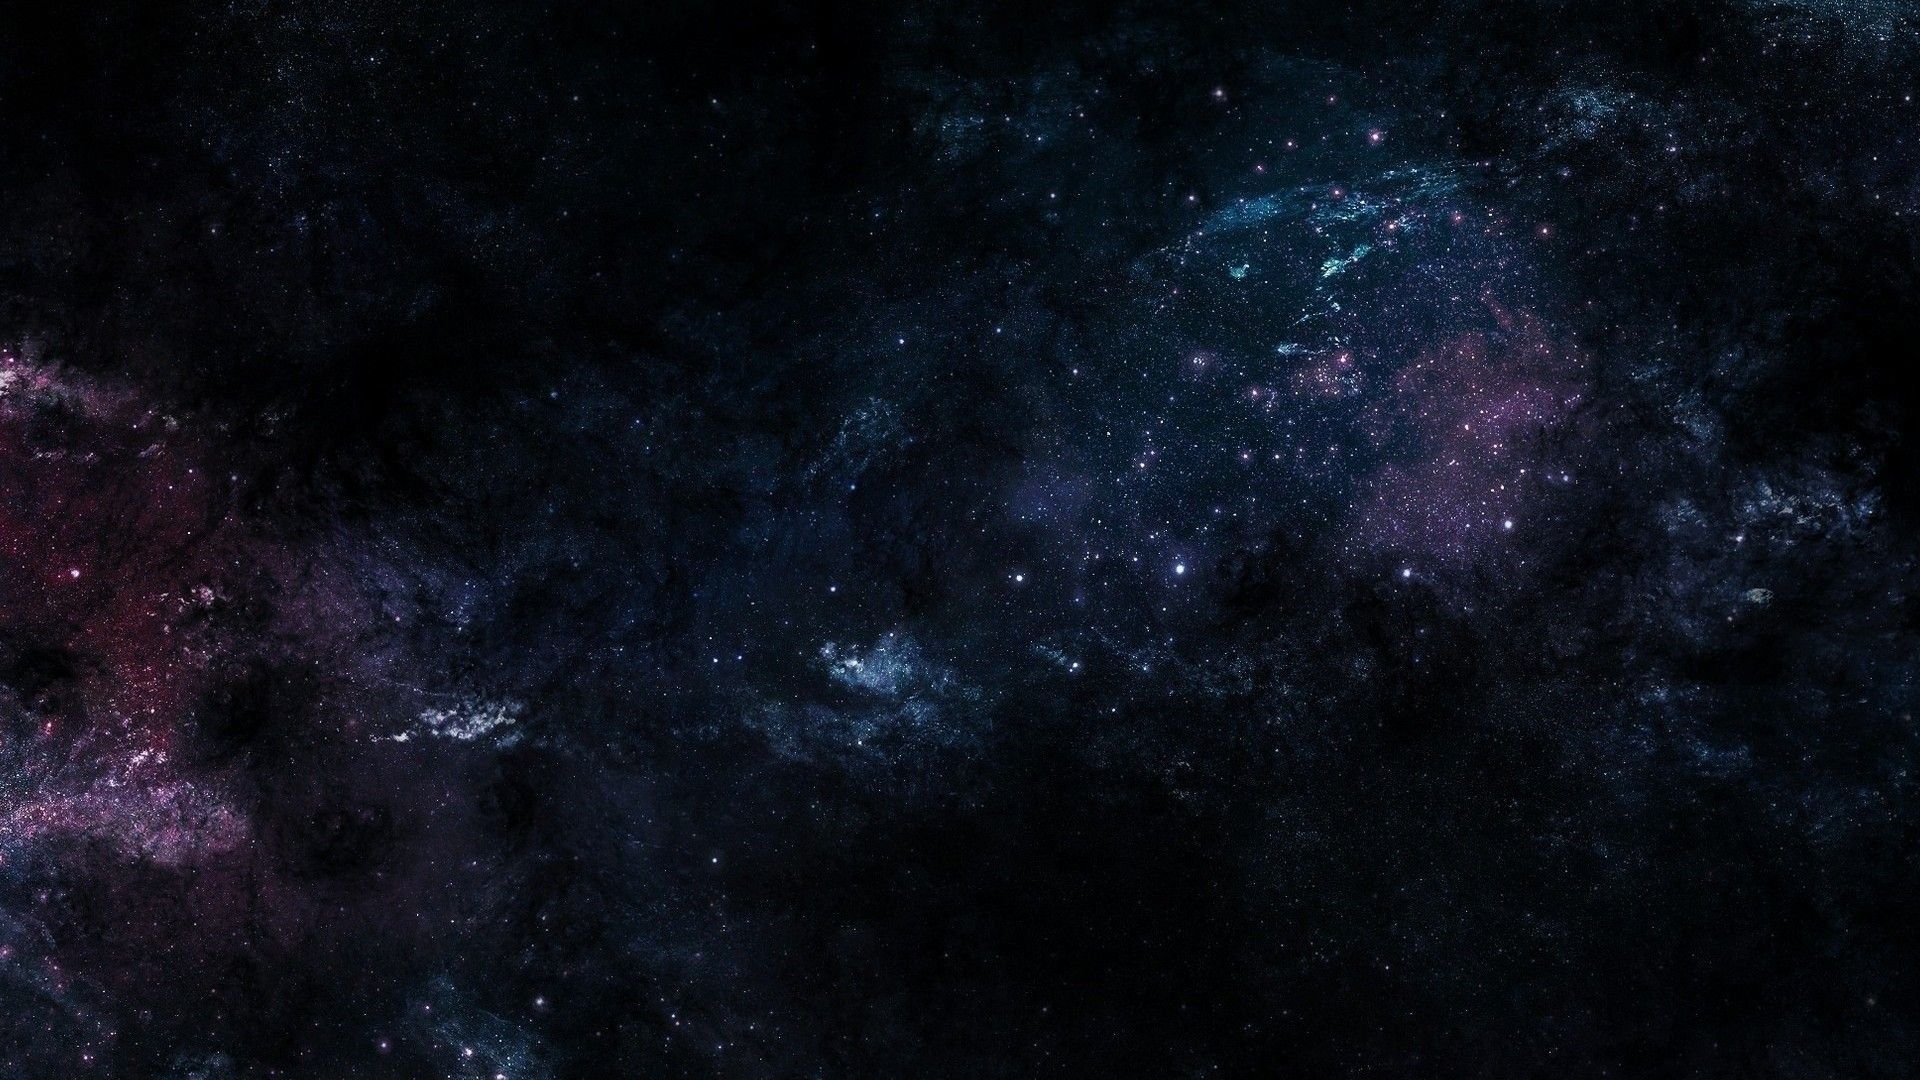 Wallpaper Stars in The Sky During Night Time, Background - Download Free  Image